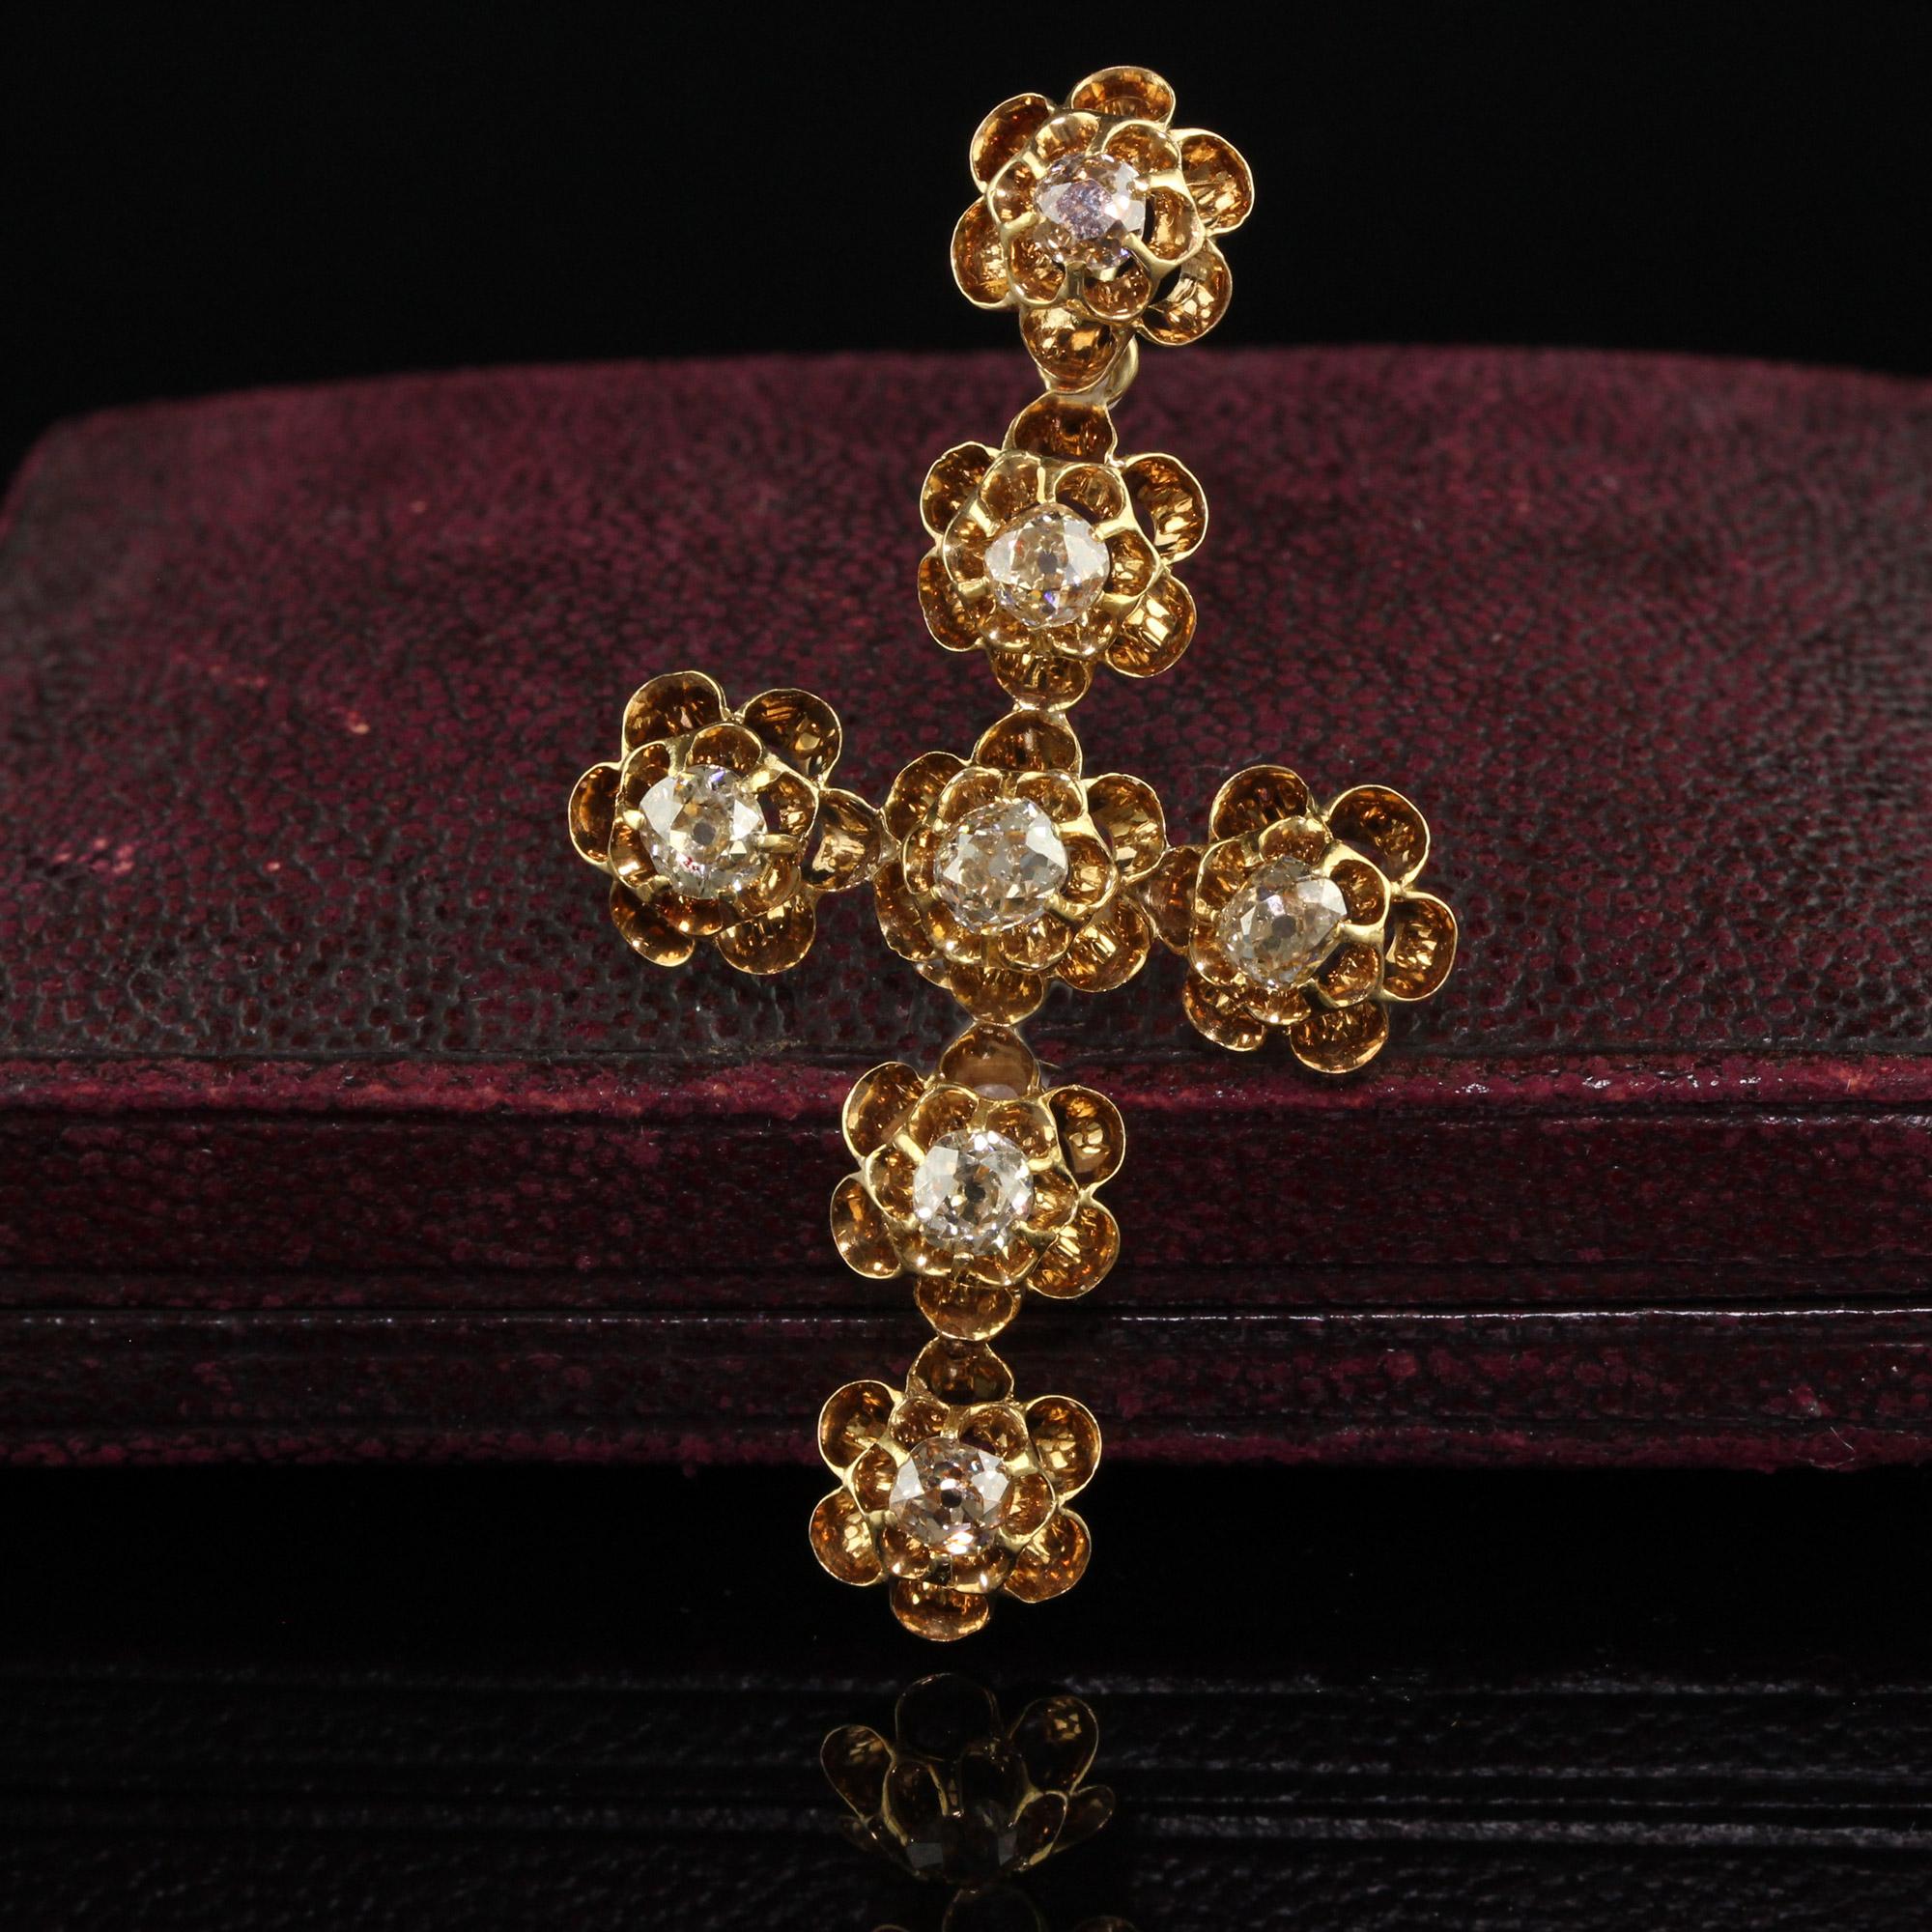 Beautiful Antique Victorian 18K Yellow Gold Old Mine Diamond Floral Cross. This gorgeous Victorian pendant is crafted in 18k yellow gold. The cross has 7 old mine cut diamonds set on a beautifully floral cross. The pendant is large and very